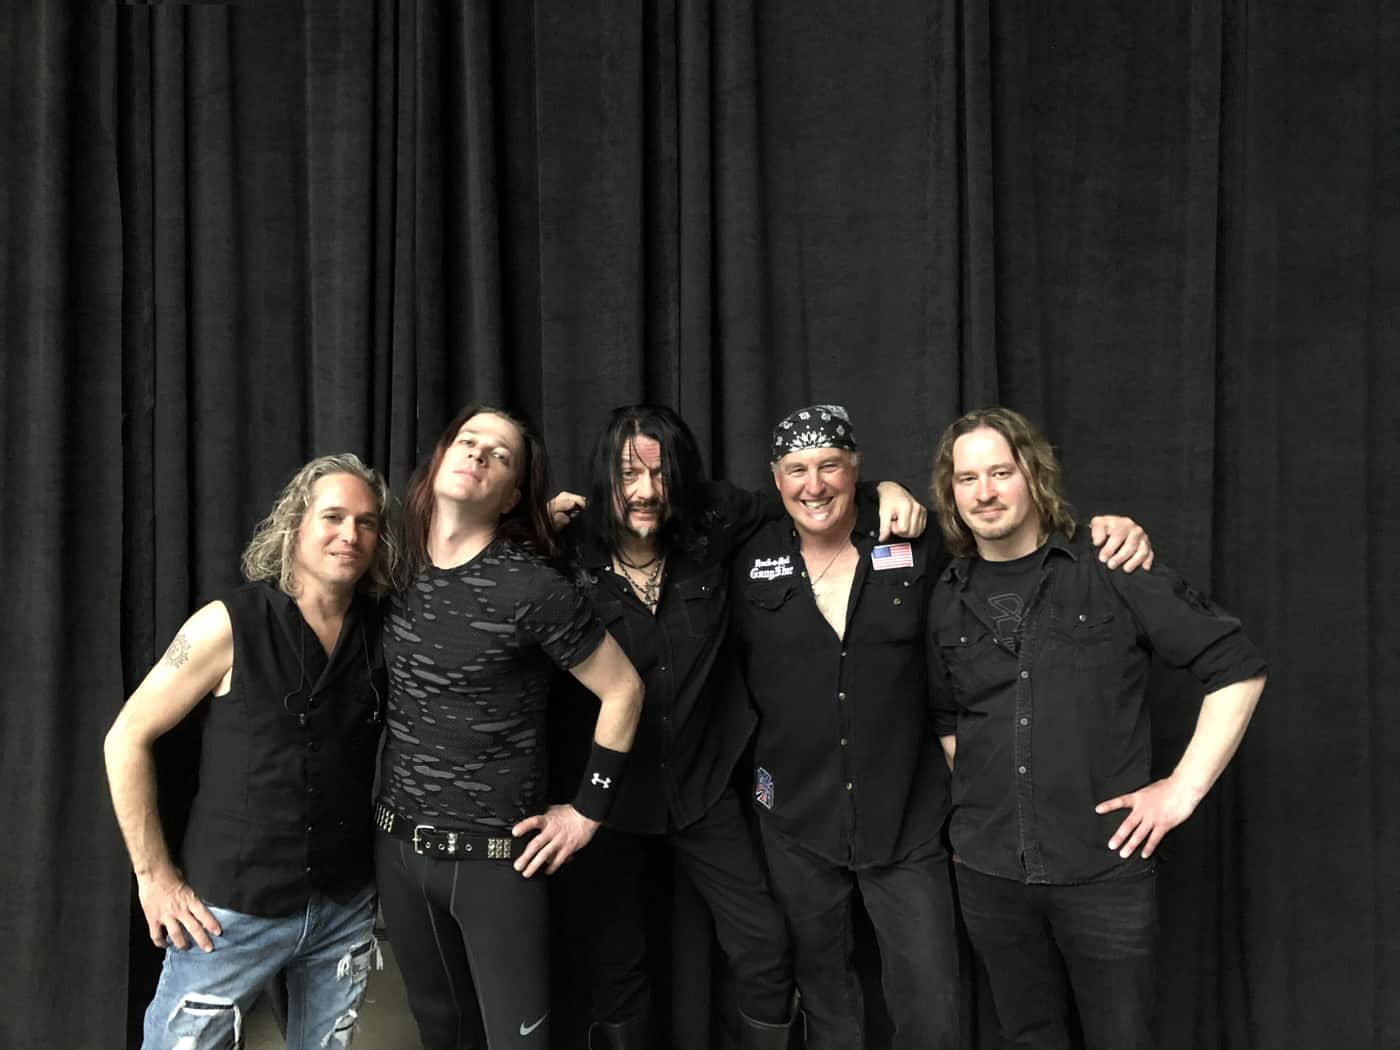 Classic rock tribute group Arch Allies to play Fargo Theatre in October